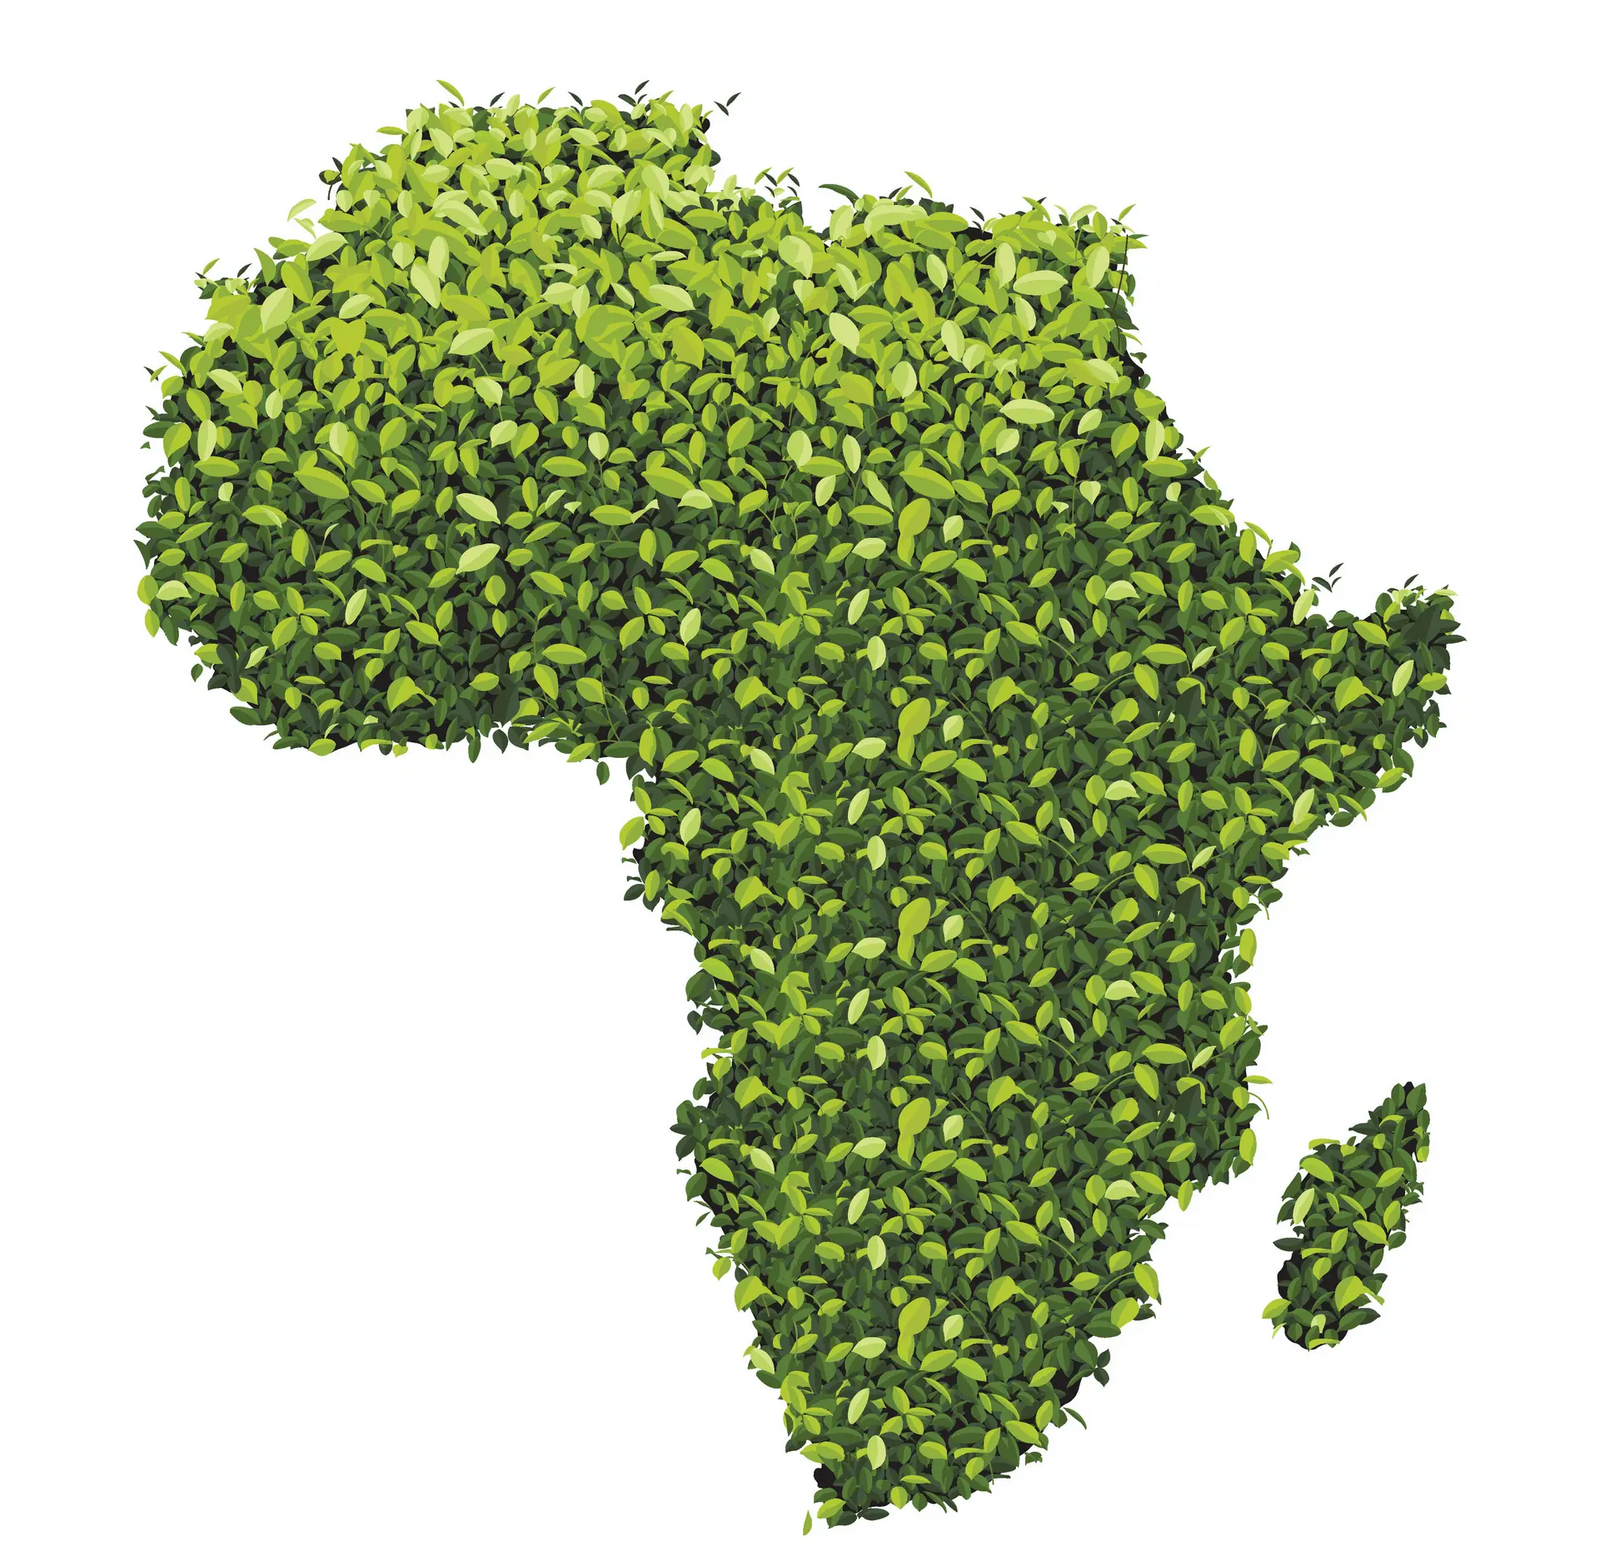 African Continent made of leafes